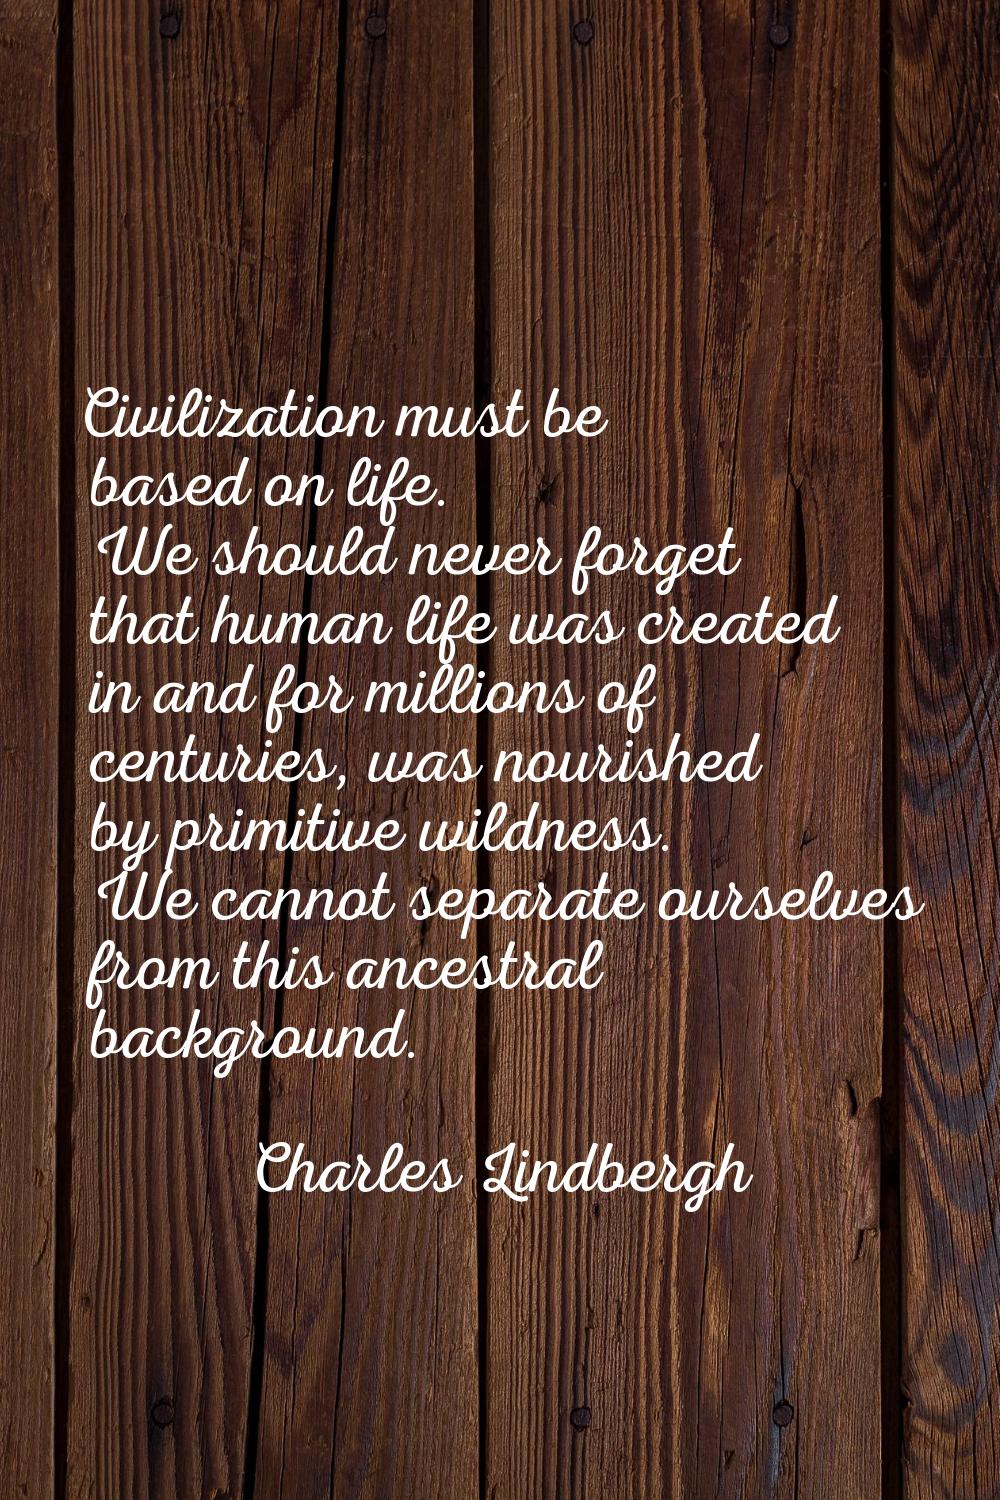 Civilization must be based on life. We should never forget that human life was created in and for m